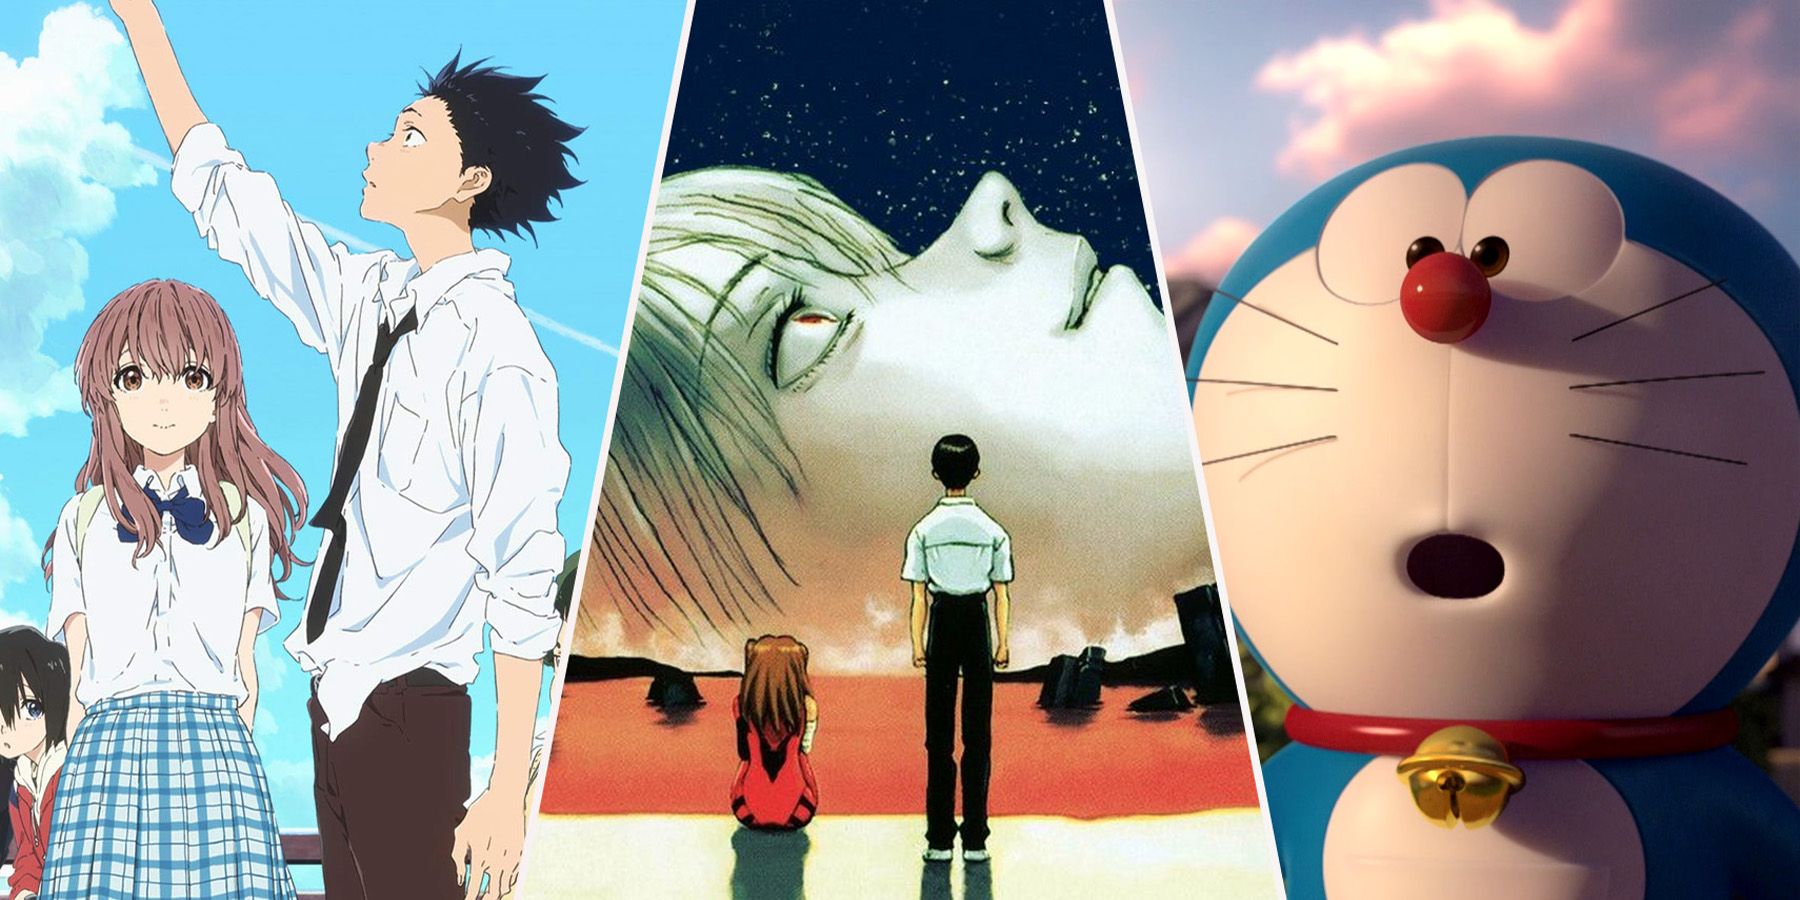 The 25 Best Anime Movies of All Time According to IMDb Score